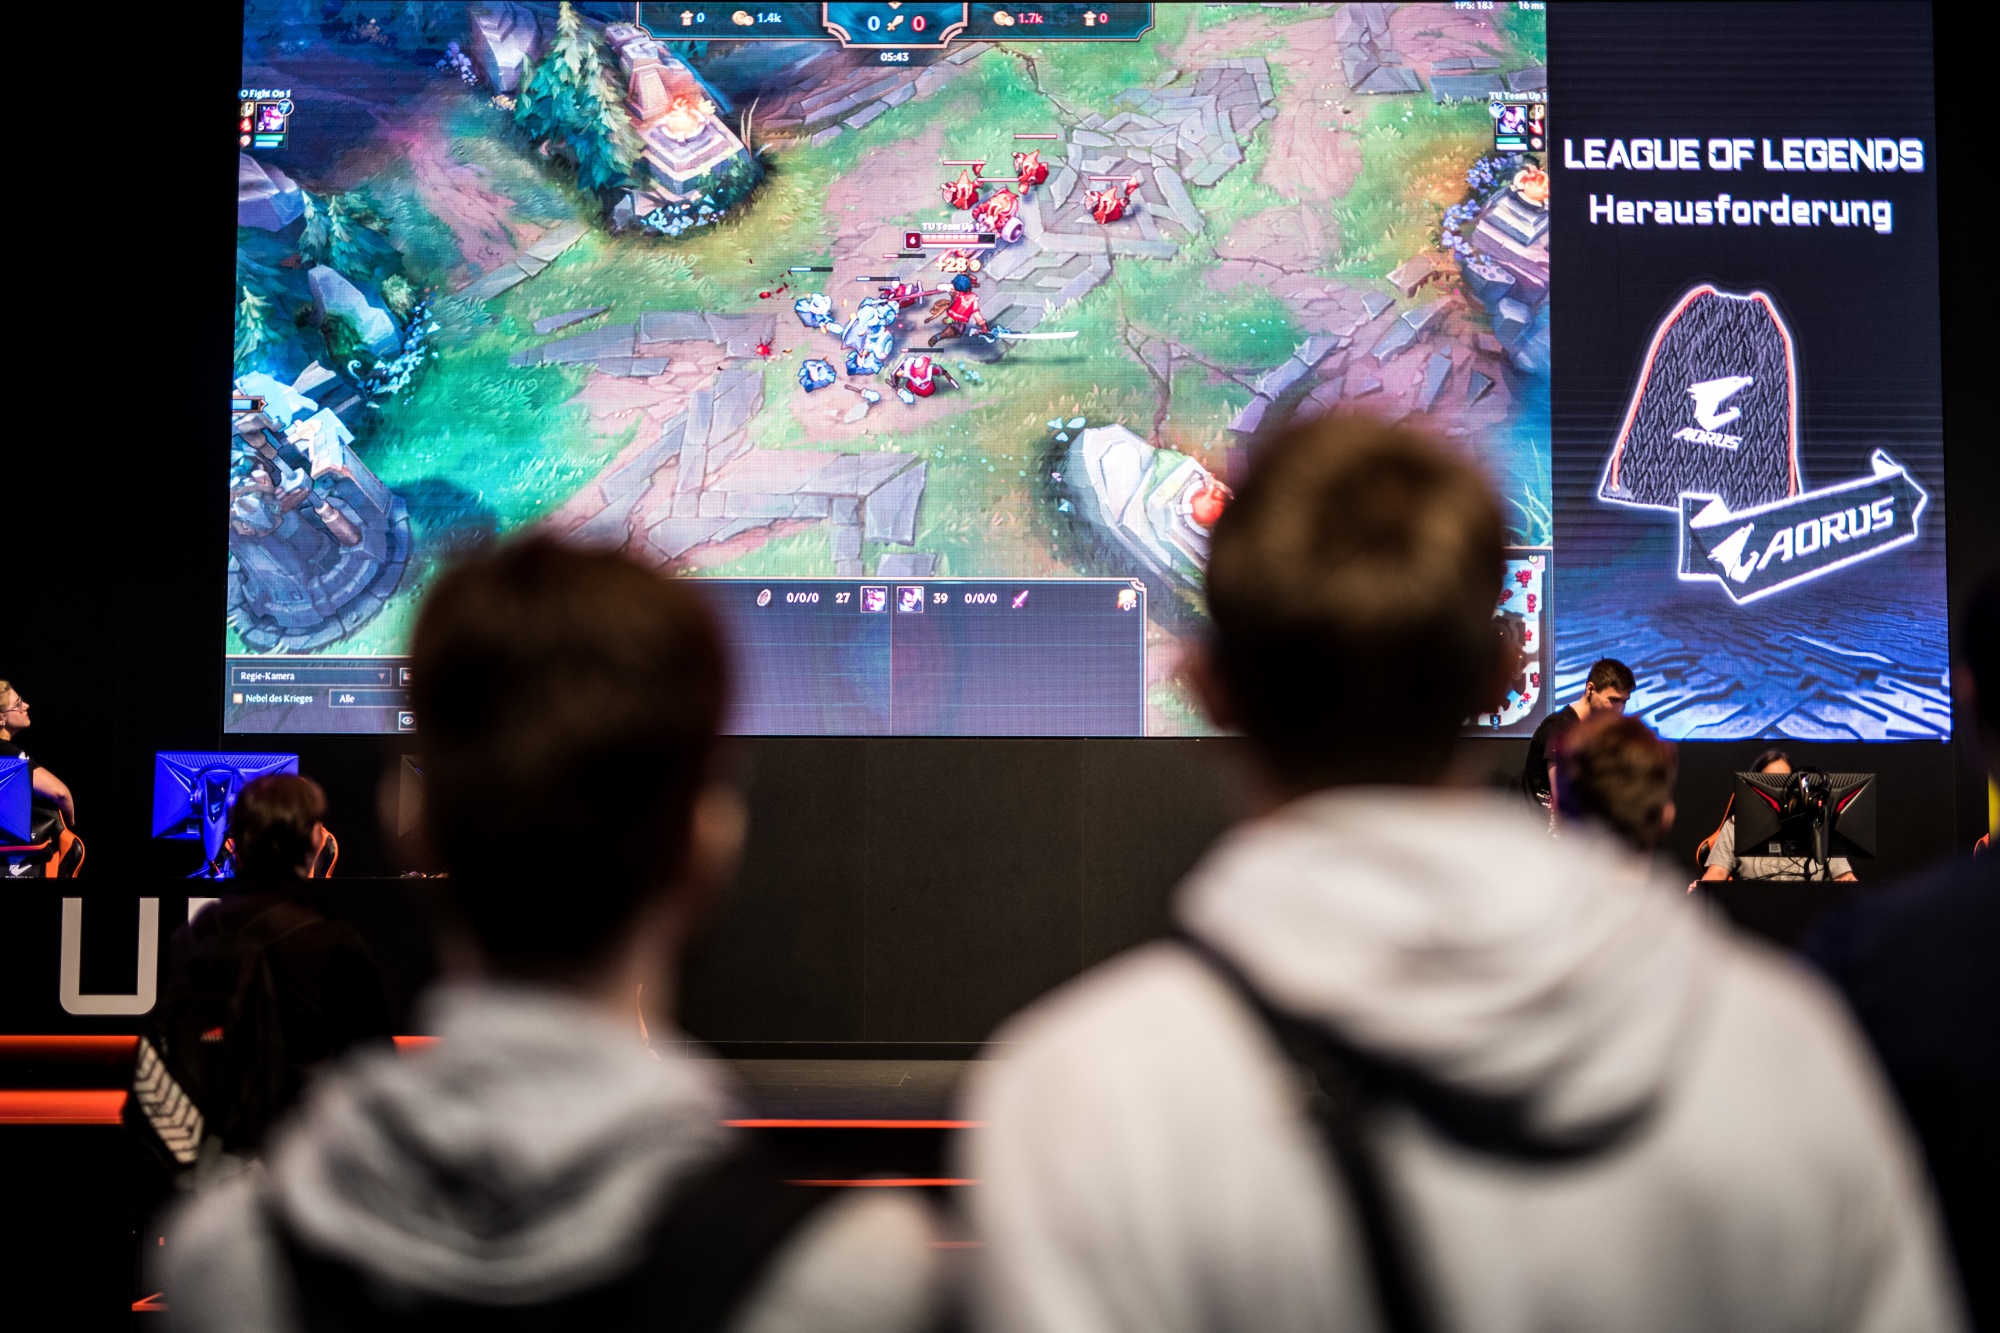 League of Legends hacked, users' personal information stolen